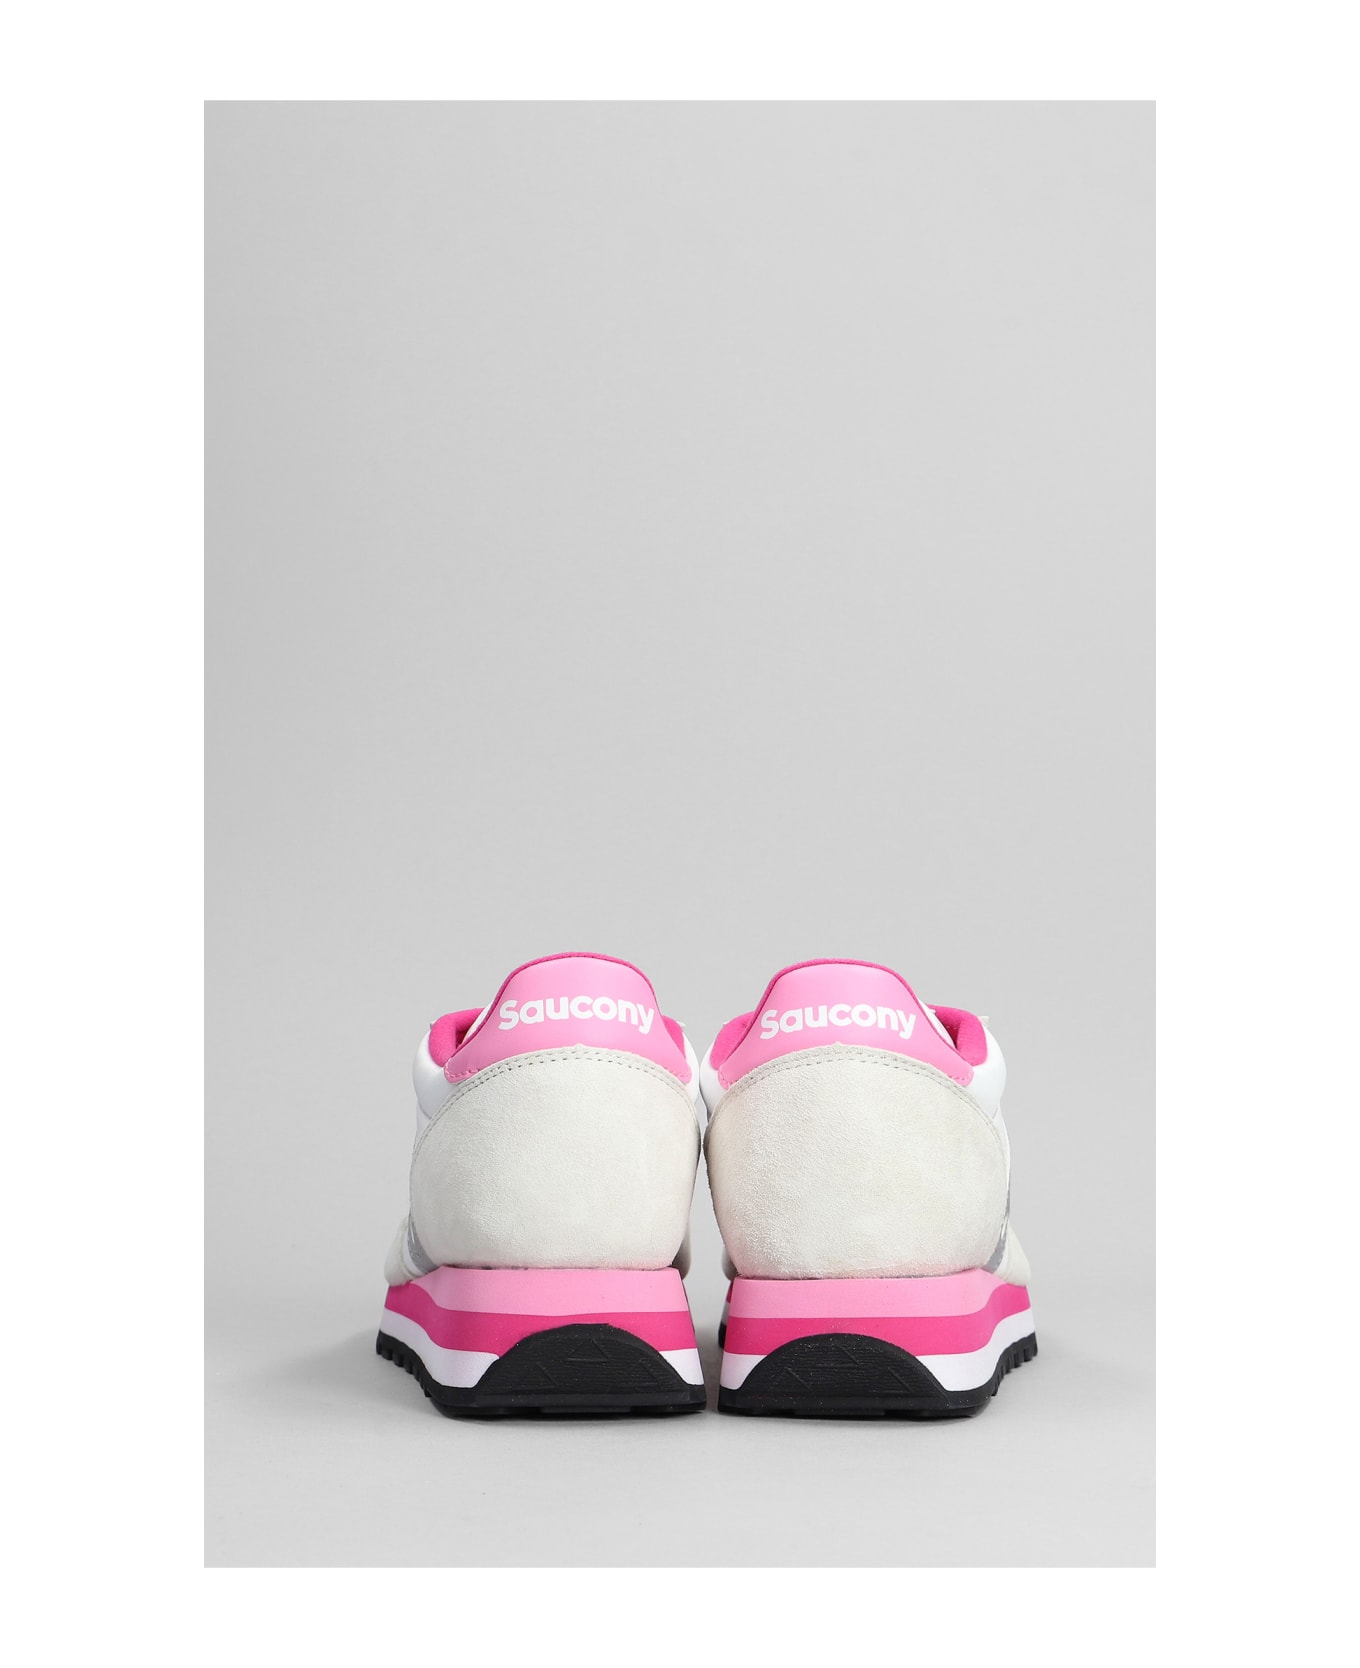 Saucony Jazz Triple Sneakers In White Suede And Fabric - White/gray/pink ウェッジシューズ